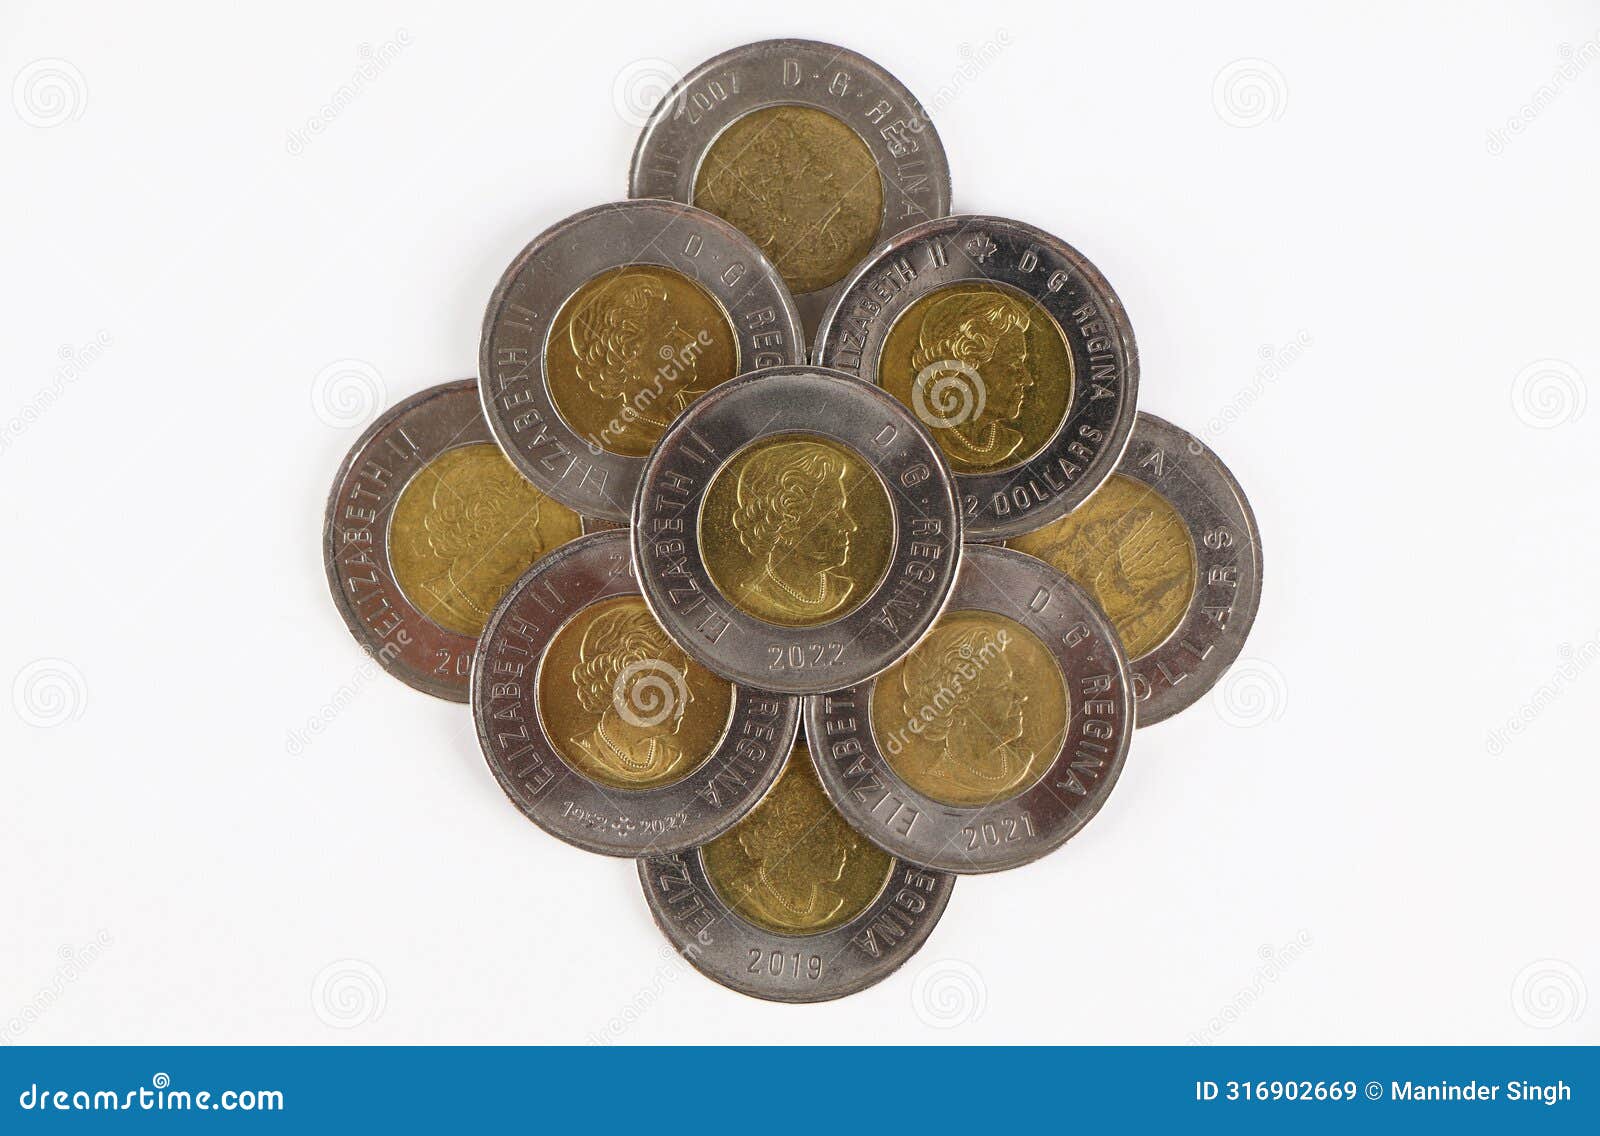 canadian dollar currency coins. circulating canadian dollar coins or currency in the market.